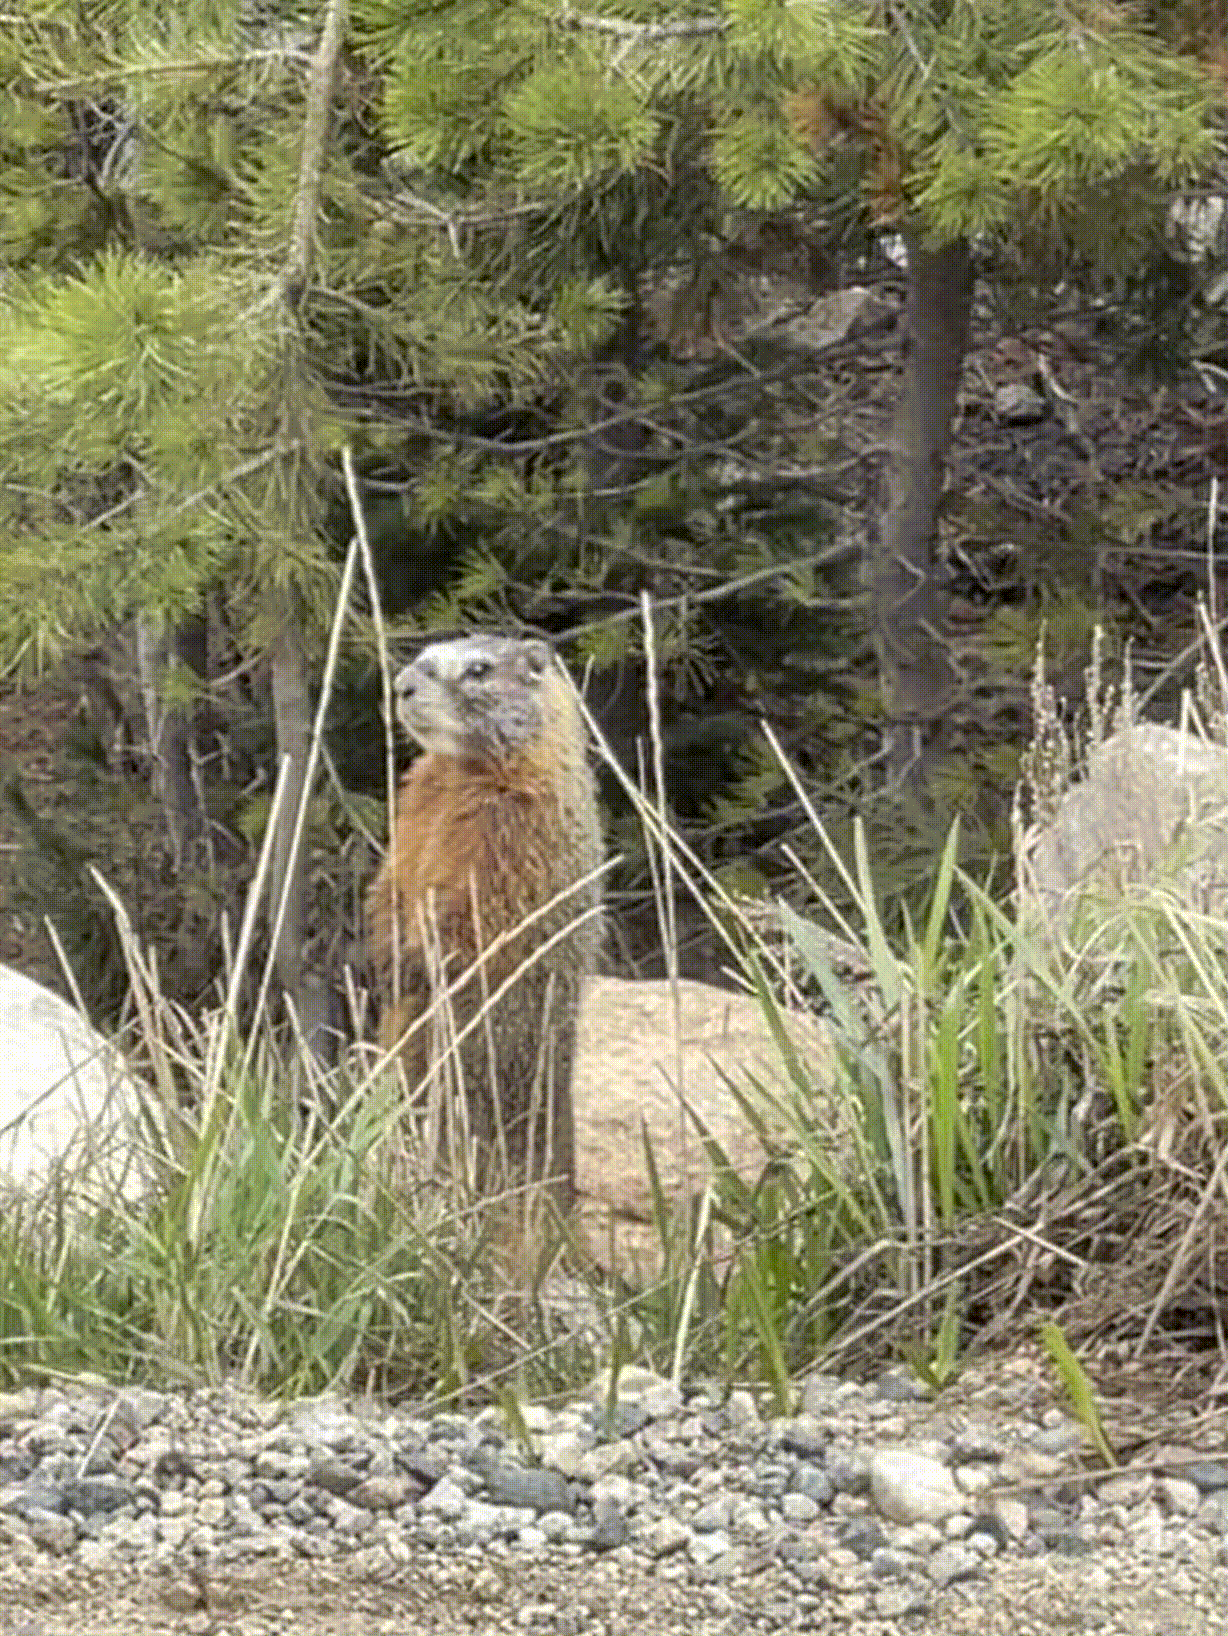 A yellow bellied marmot opening and closing its mouth